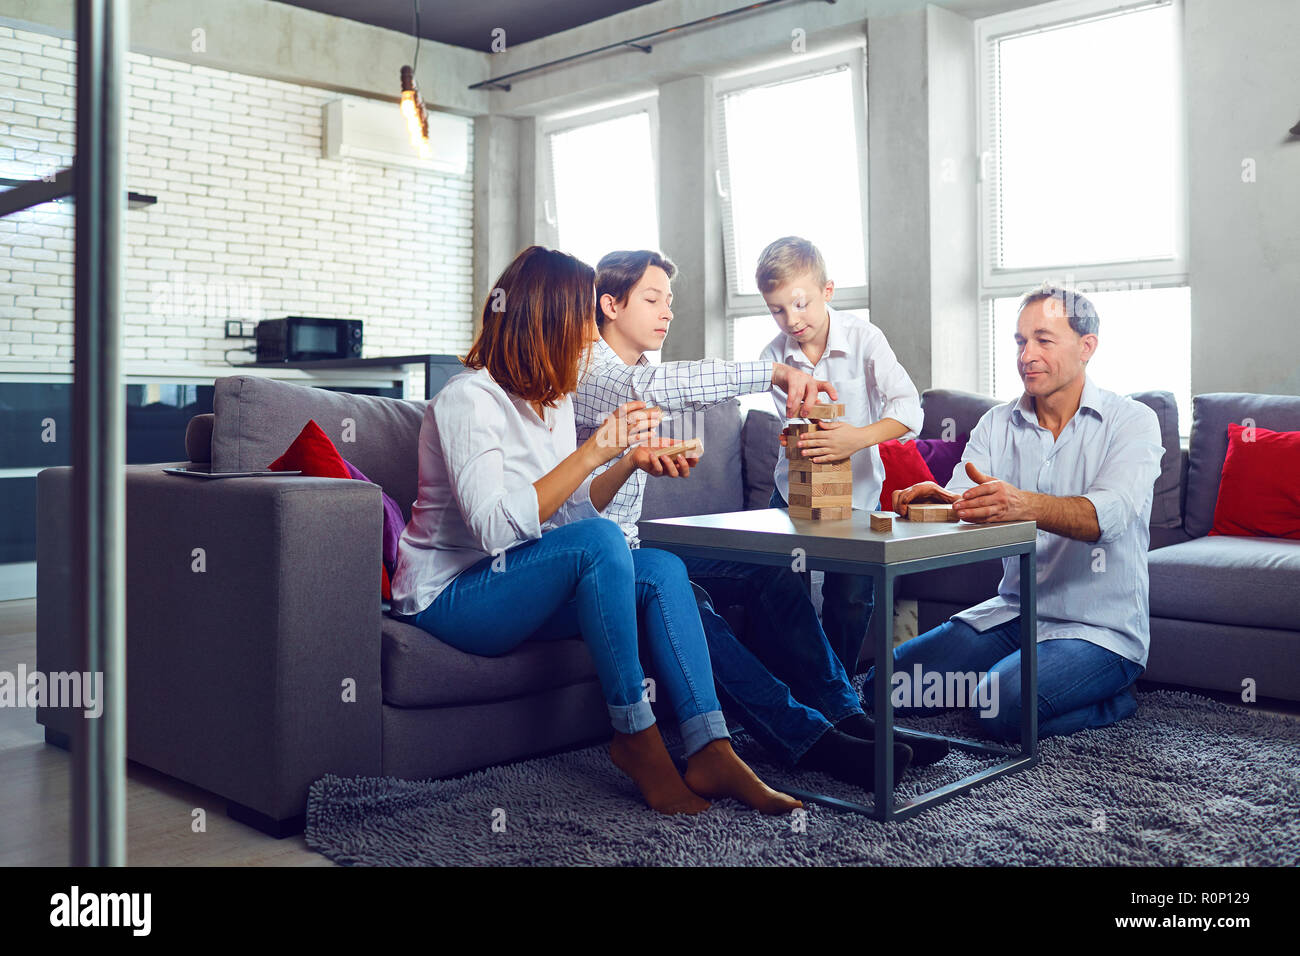 The family plays board games gaily while sitting at the table. Stock Photo